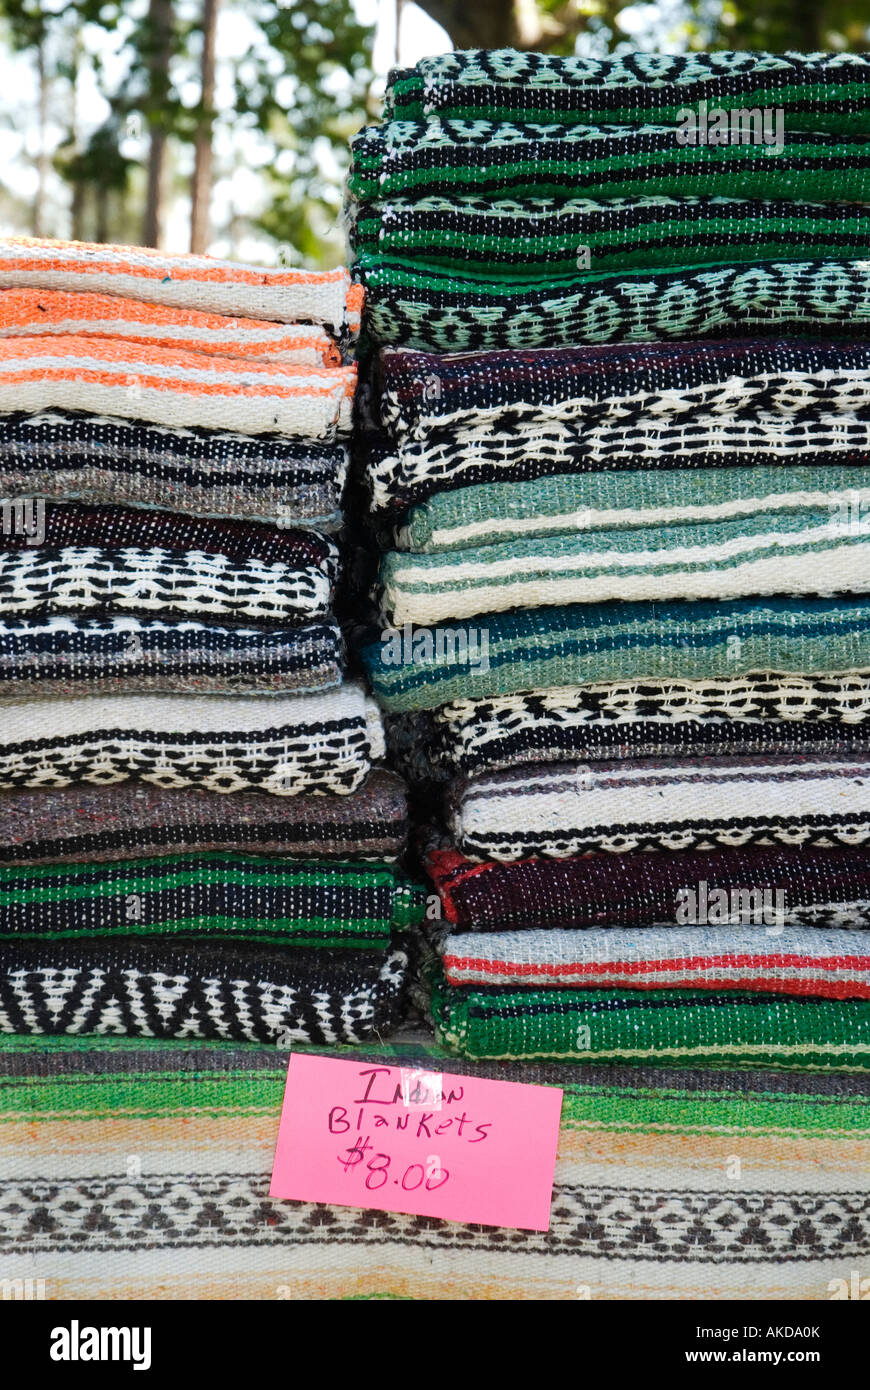 Native American Indian blankets for sale at Trading Post Alligator Fest  Lake City Florida Stock Photo - Alamy